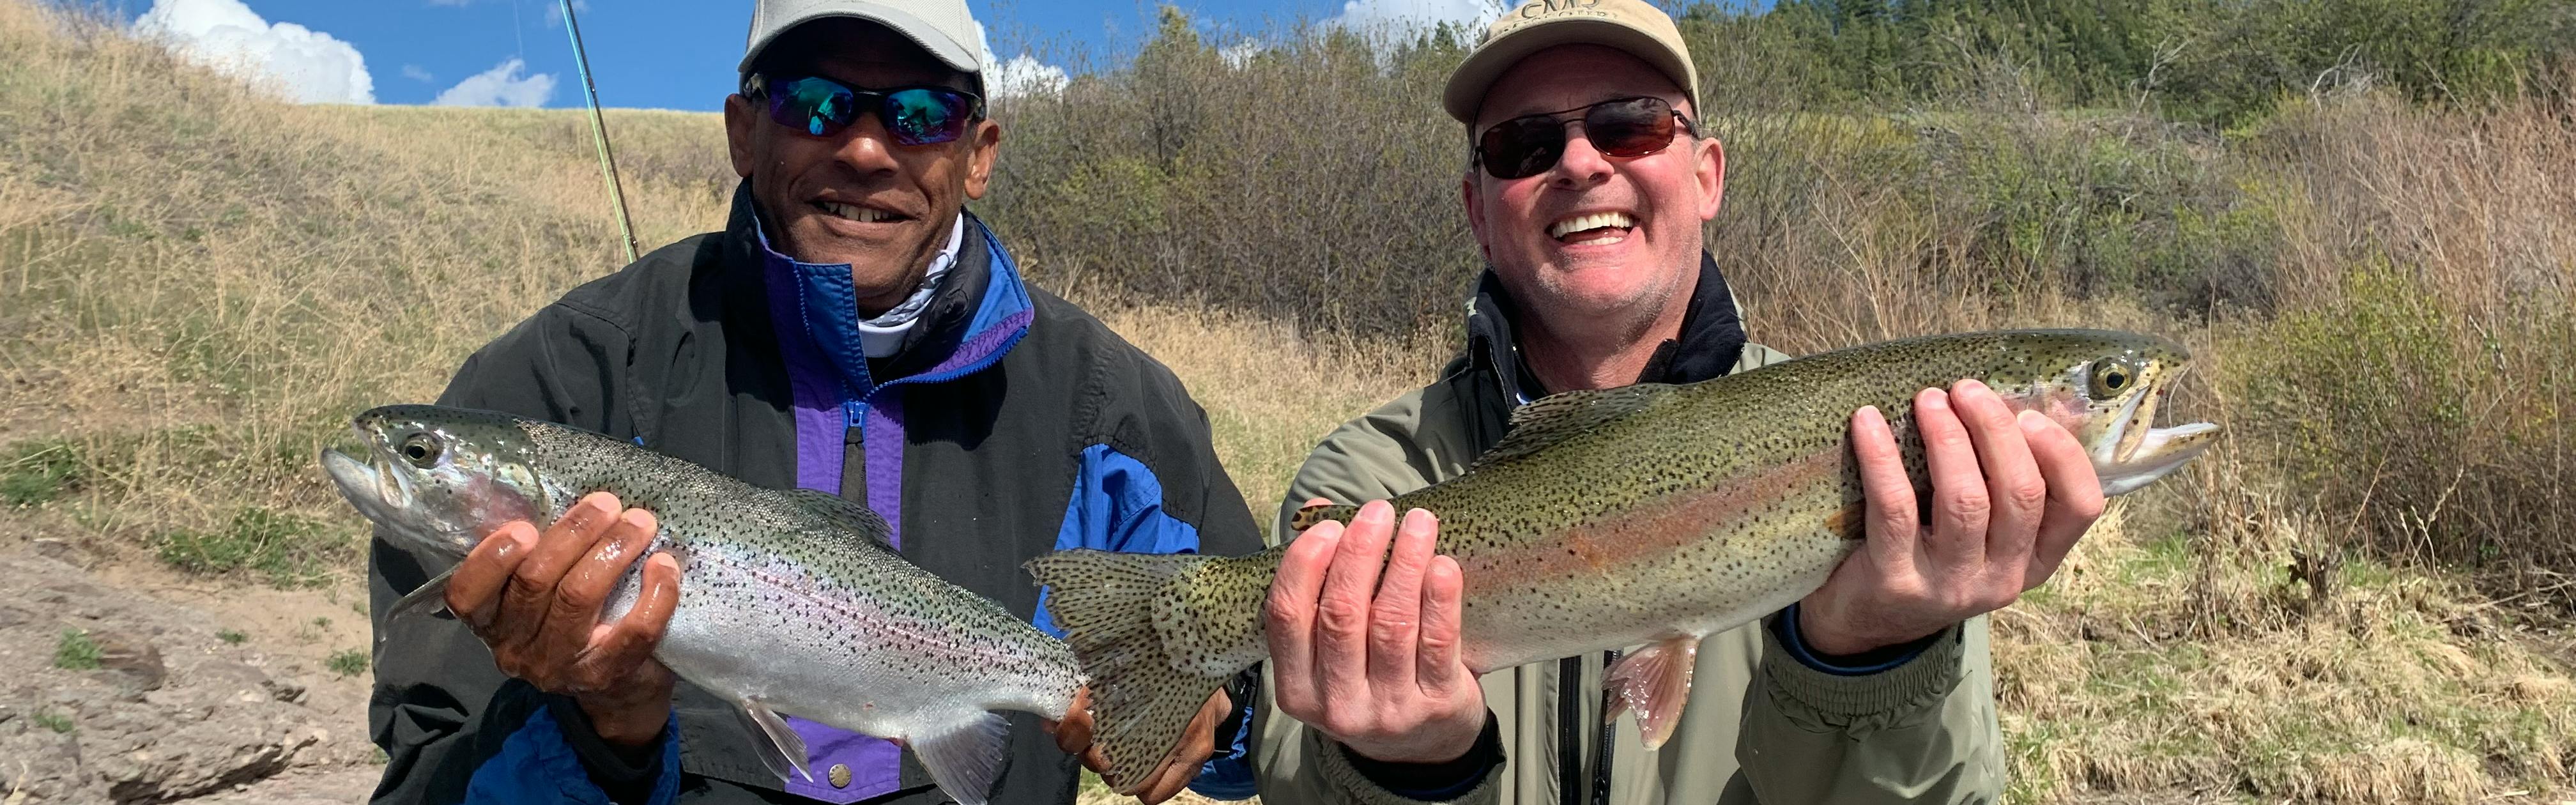 Montana Fly Fishing Guides  Montana Smith River Fly Fishing Lodges In  Bozeman Montana - Blast N Cast Outfitters